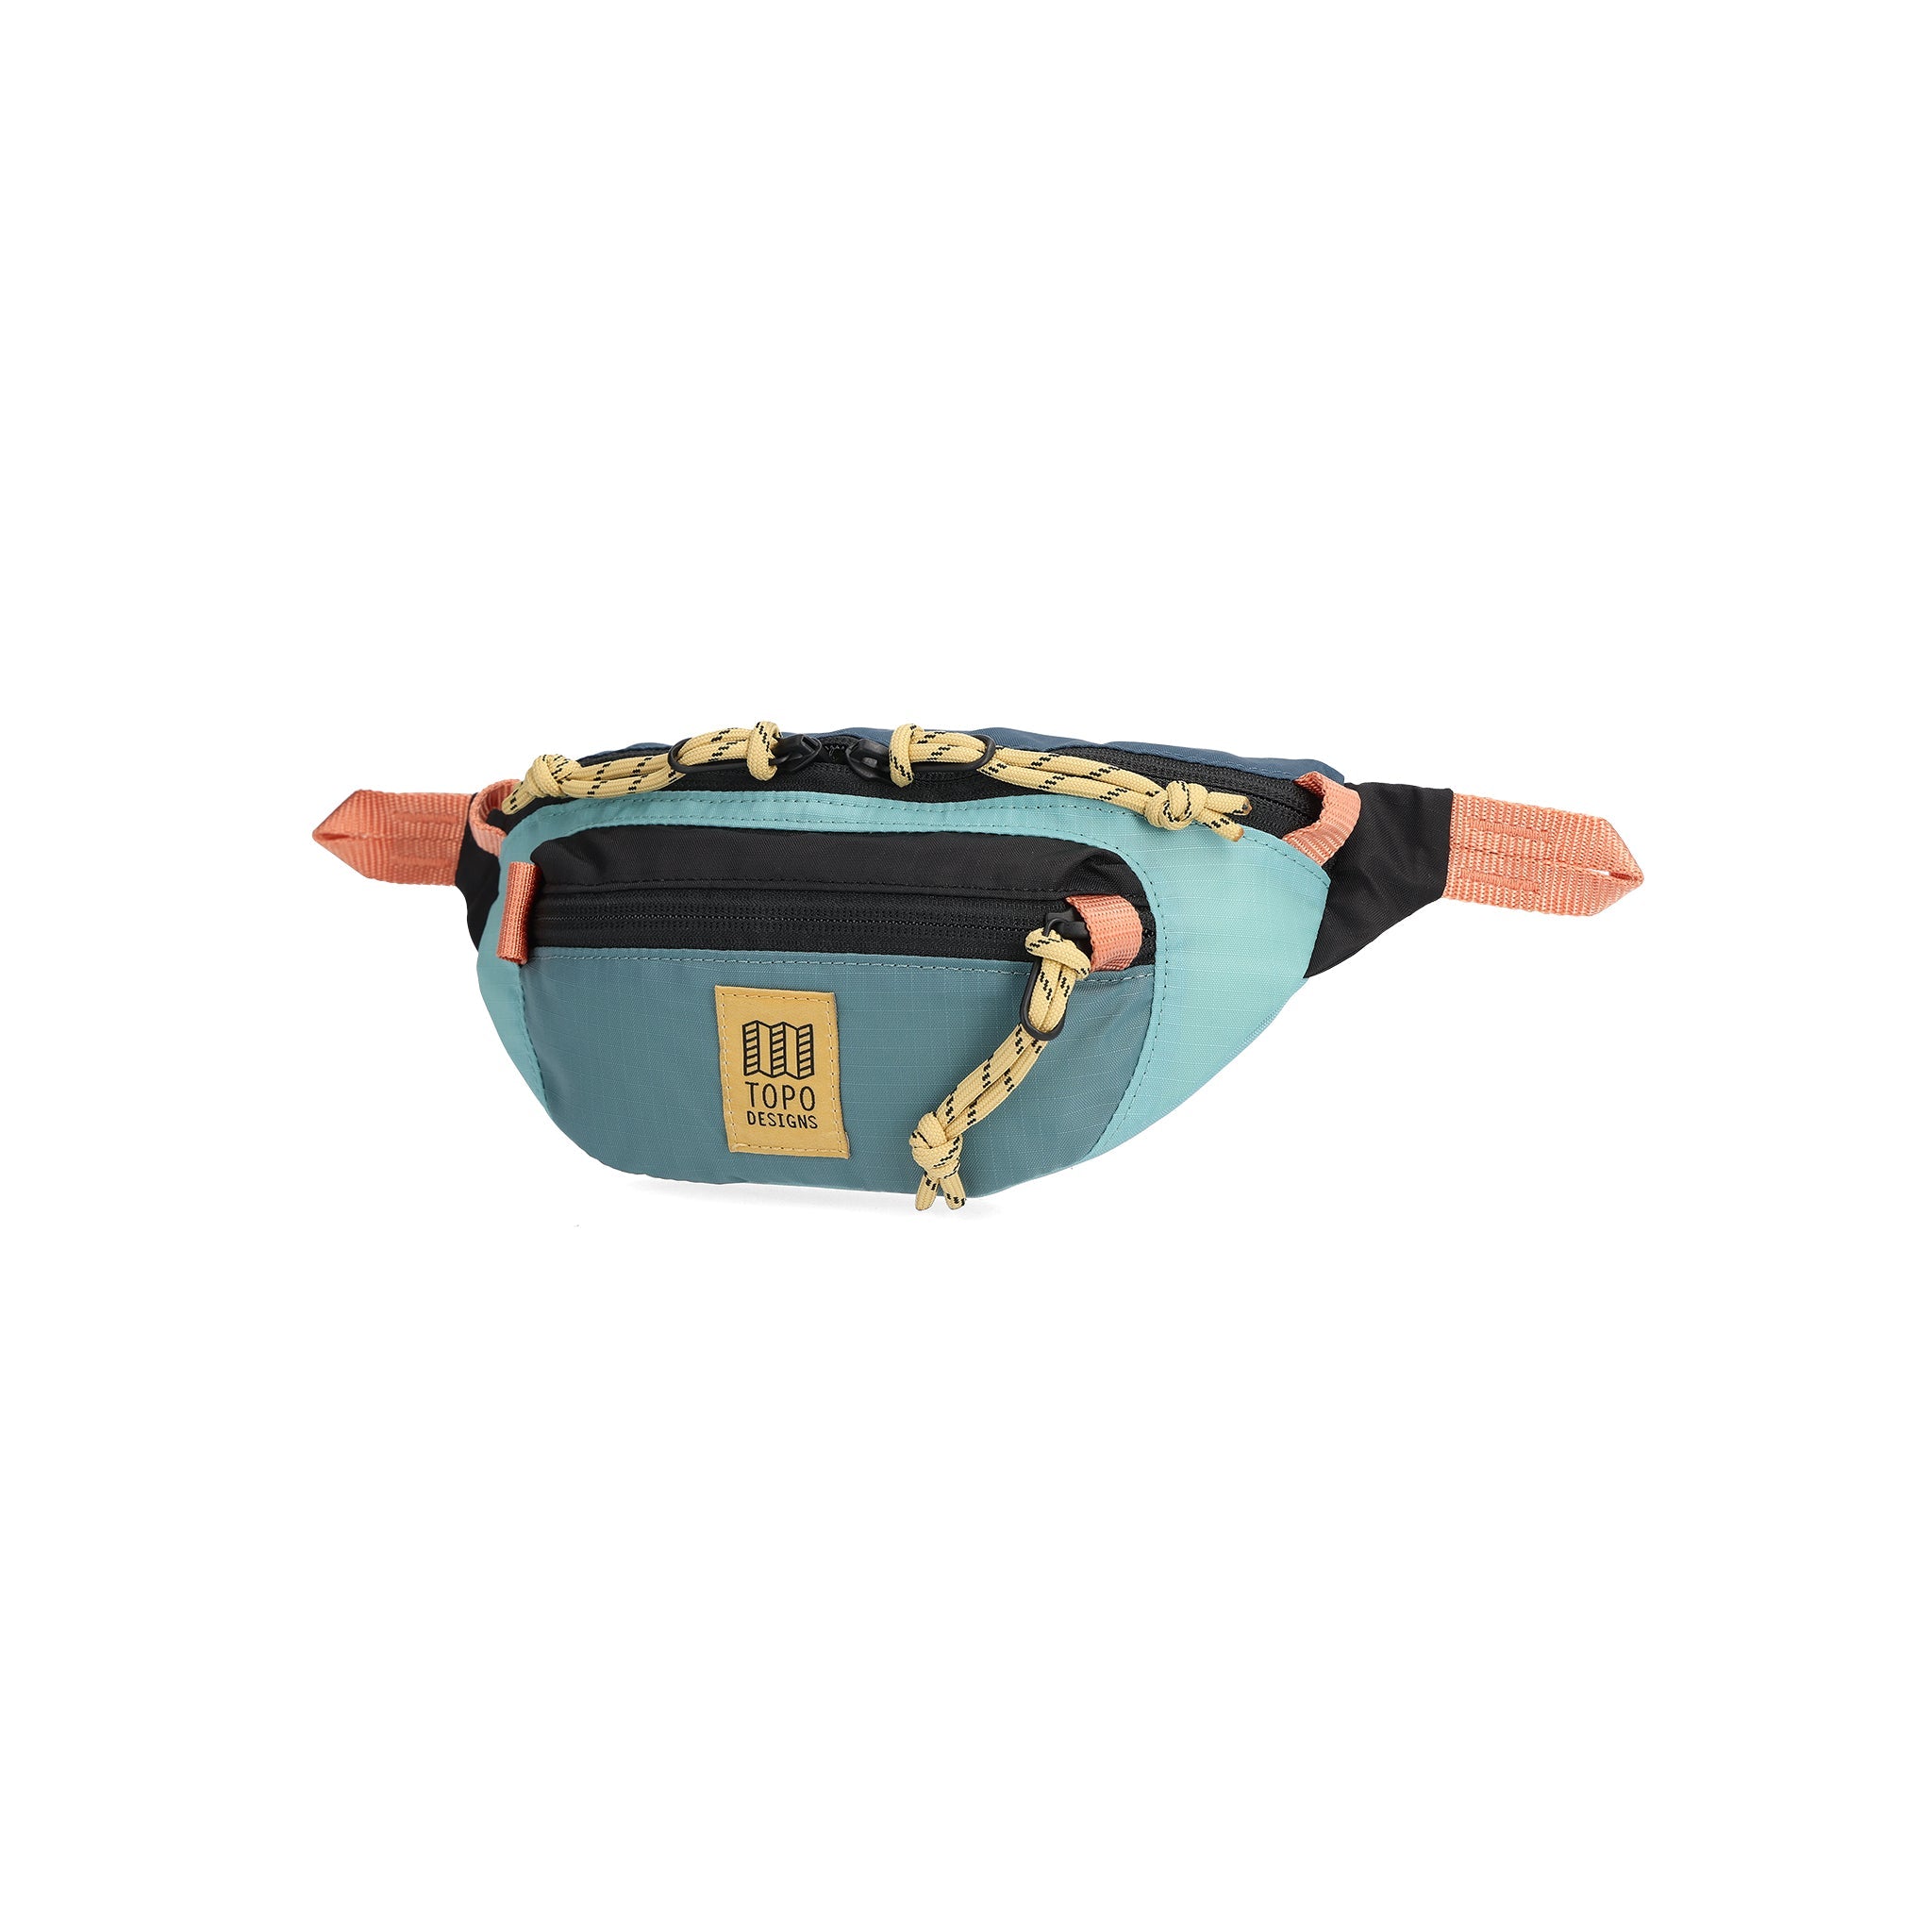 Front View of Topo Designs Mountain Waist Pack in "Geode Green / Sea Pine"